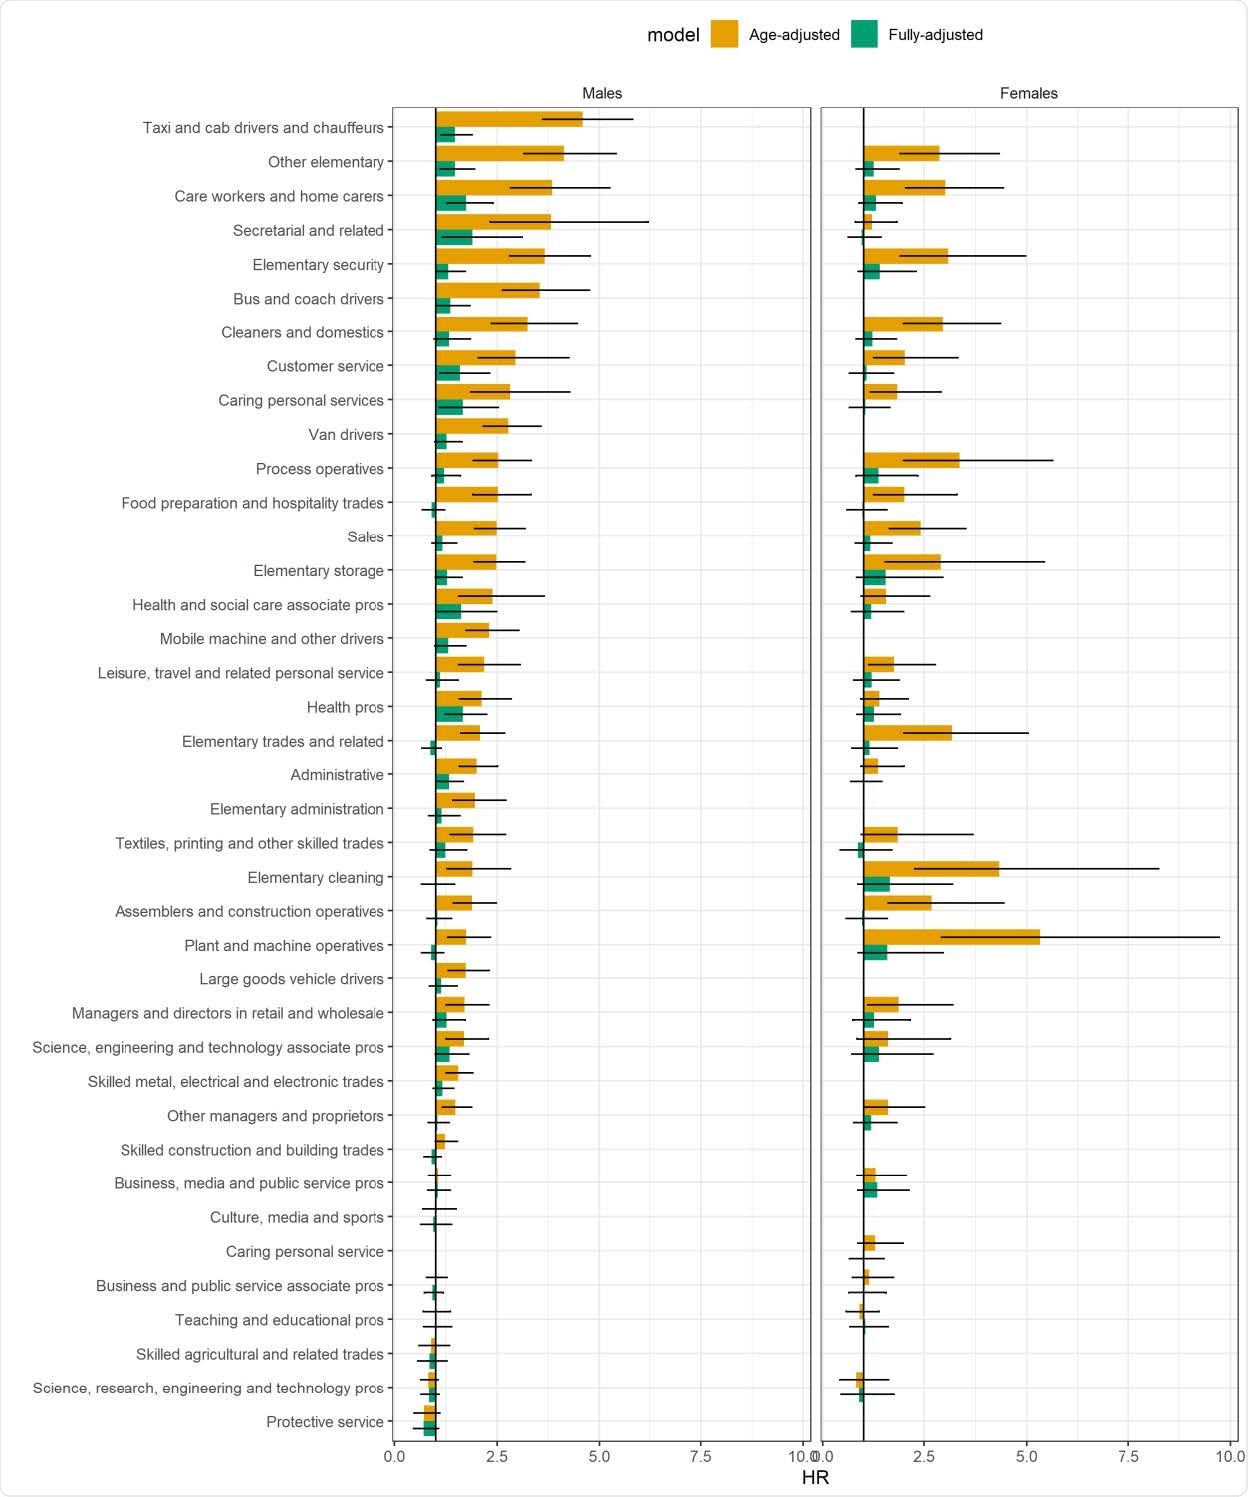 Hazard ratios for COVID-19 related death for adults aged 40 to 64 years, compared to corporate managers and directors, by sex